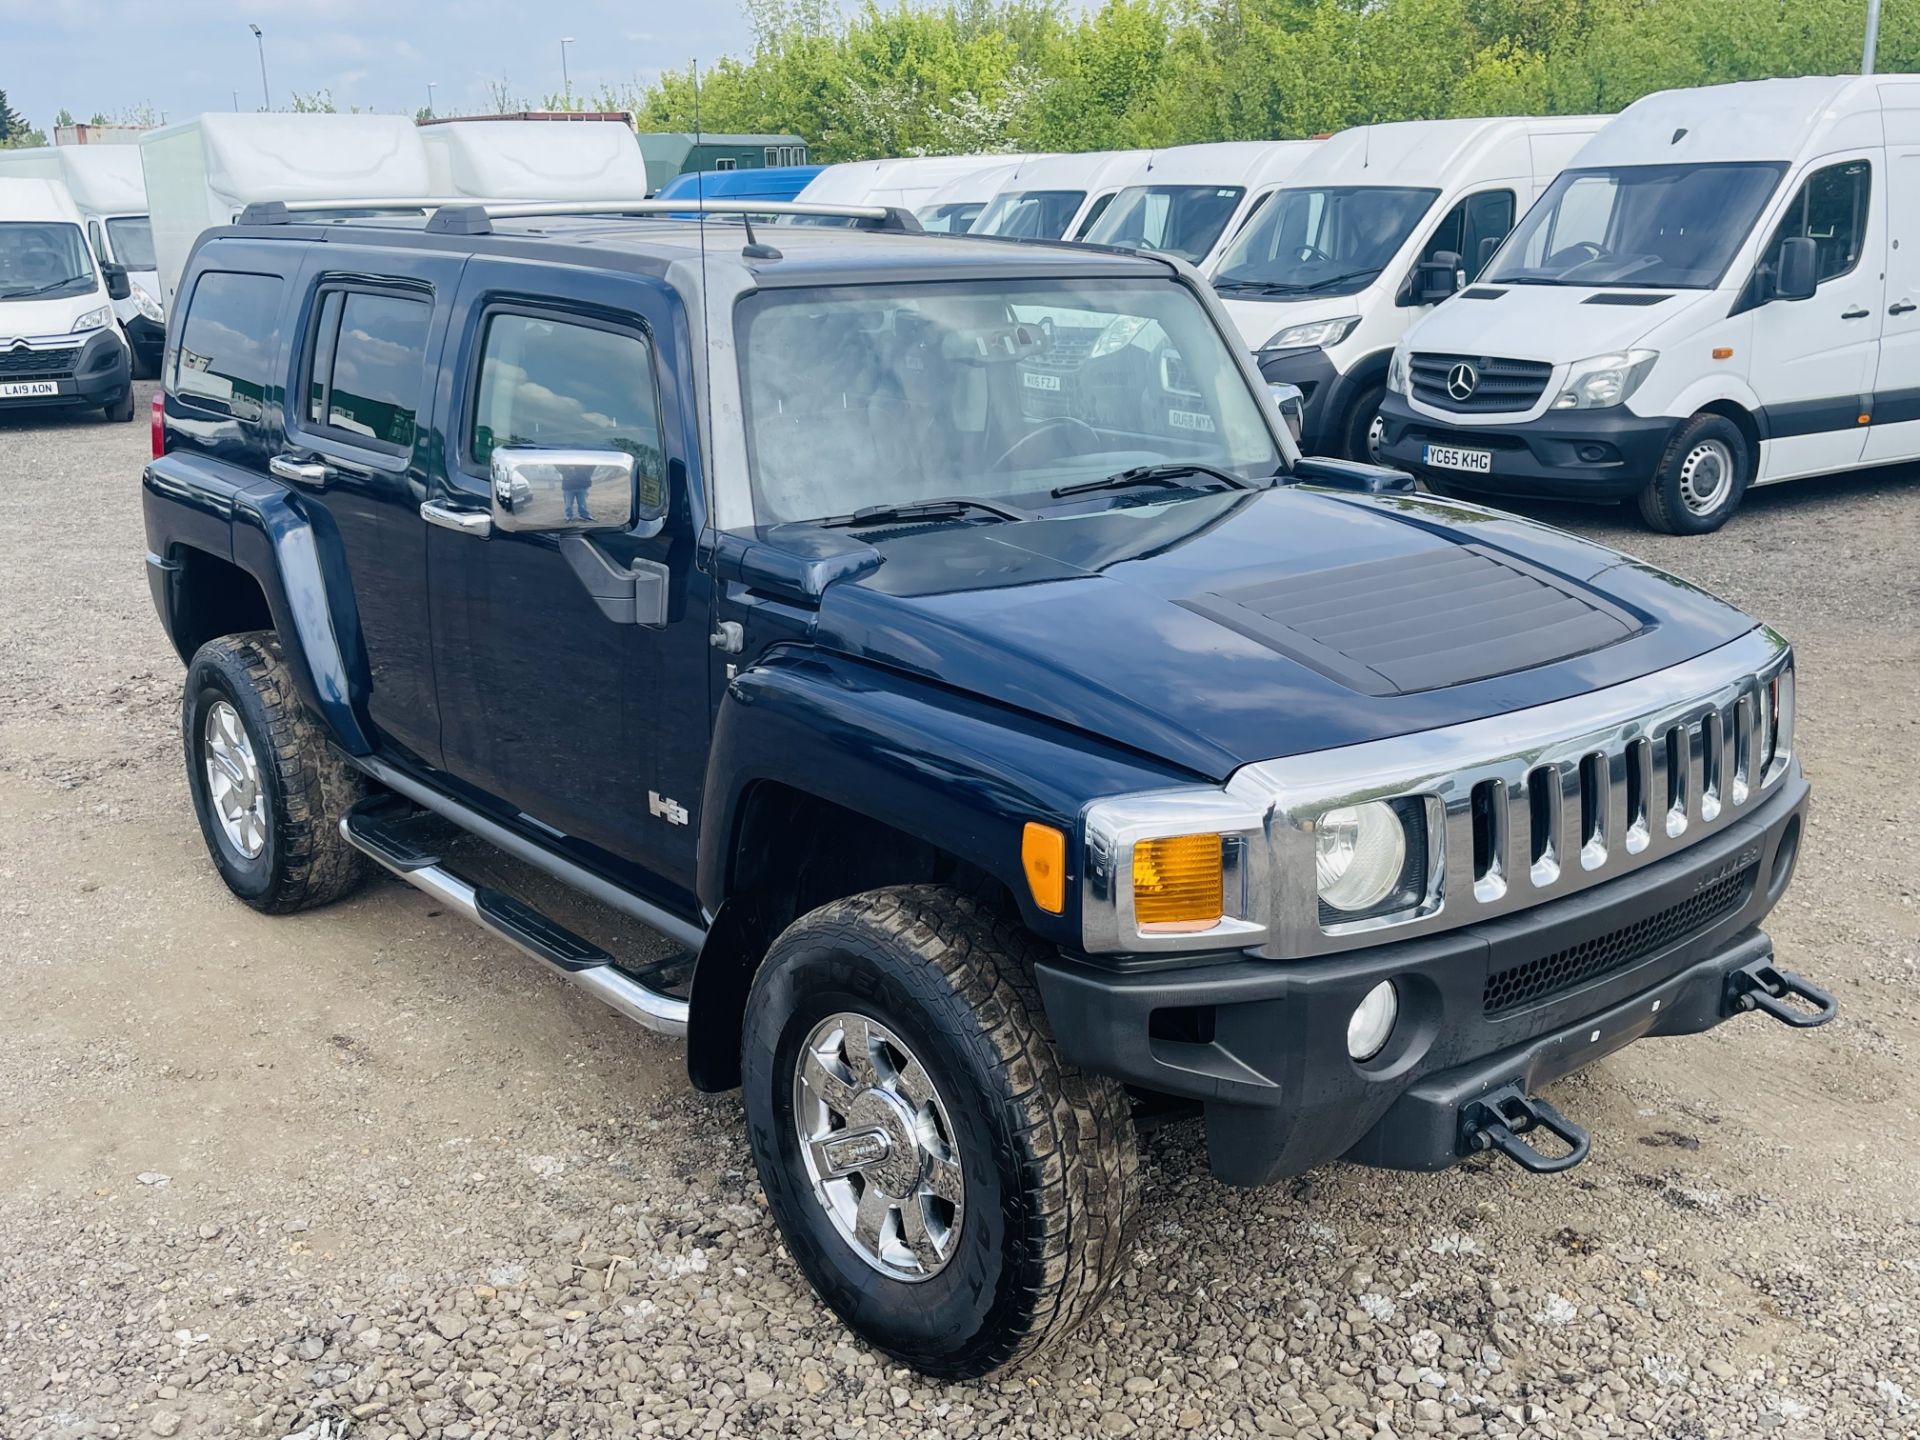 ** ON SALE ** HUMMER H3 3.7L I5 DOHC ' 2007 Year' 4WD ** RARE ** ULEZ Compliant - A/C - LHD - Image 14 of 28